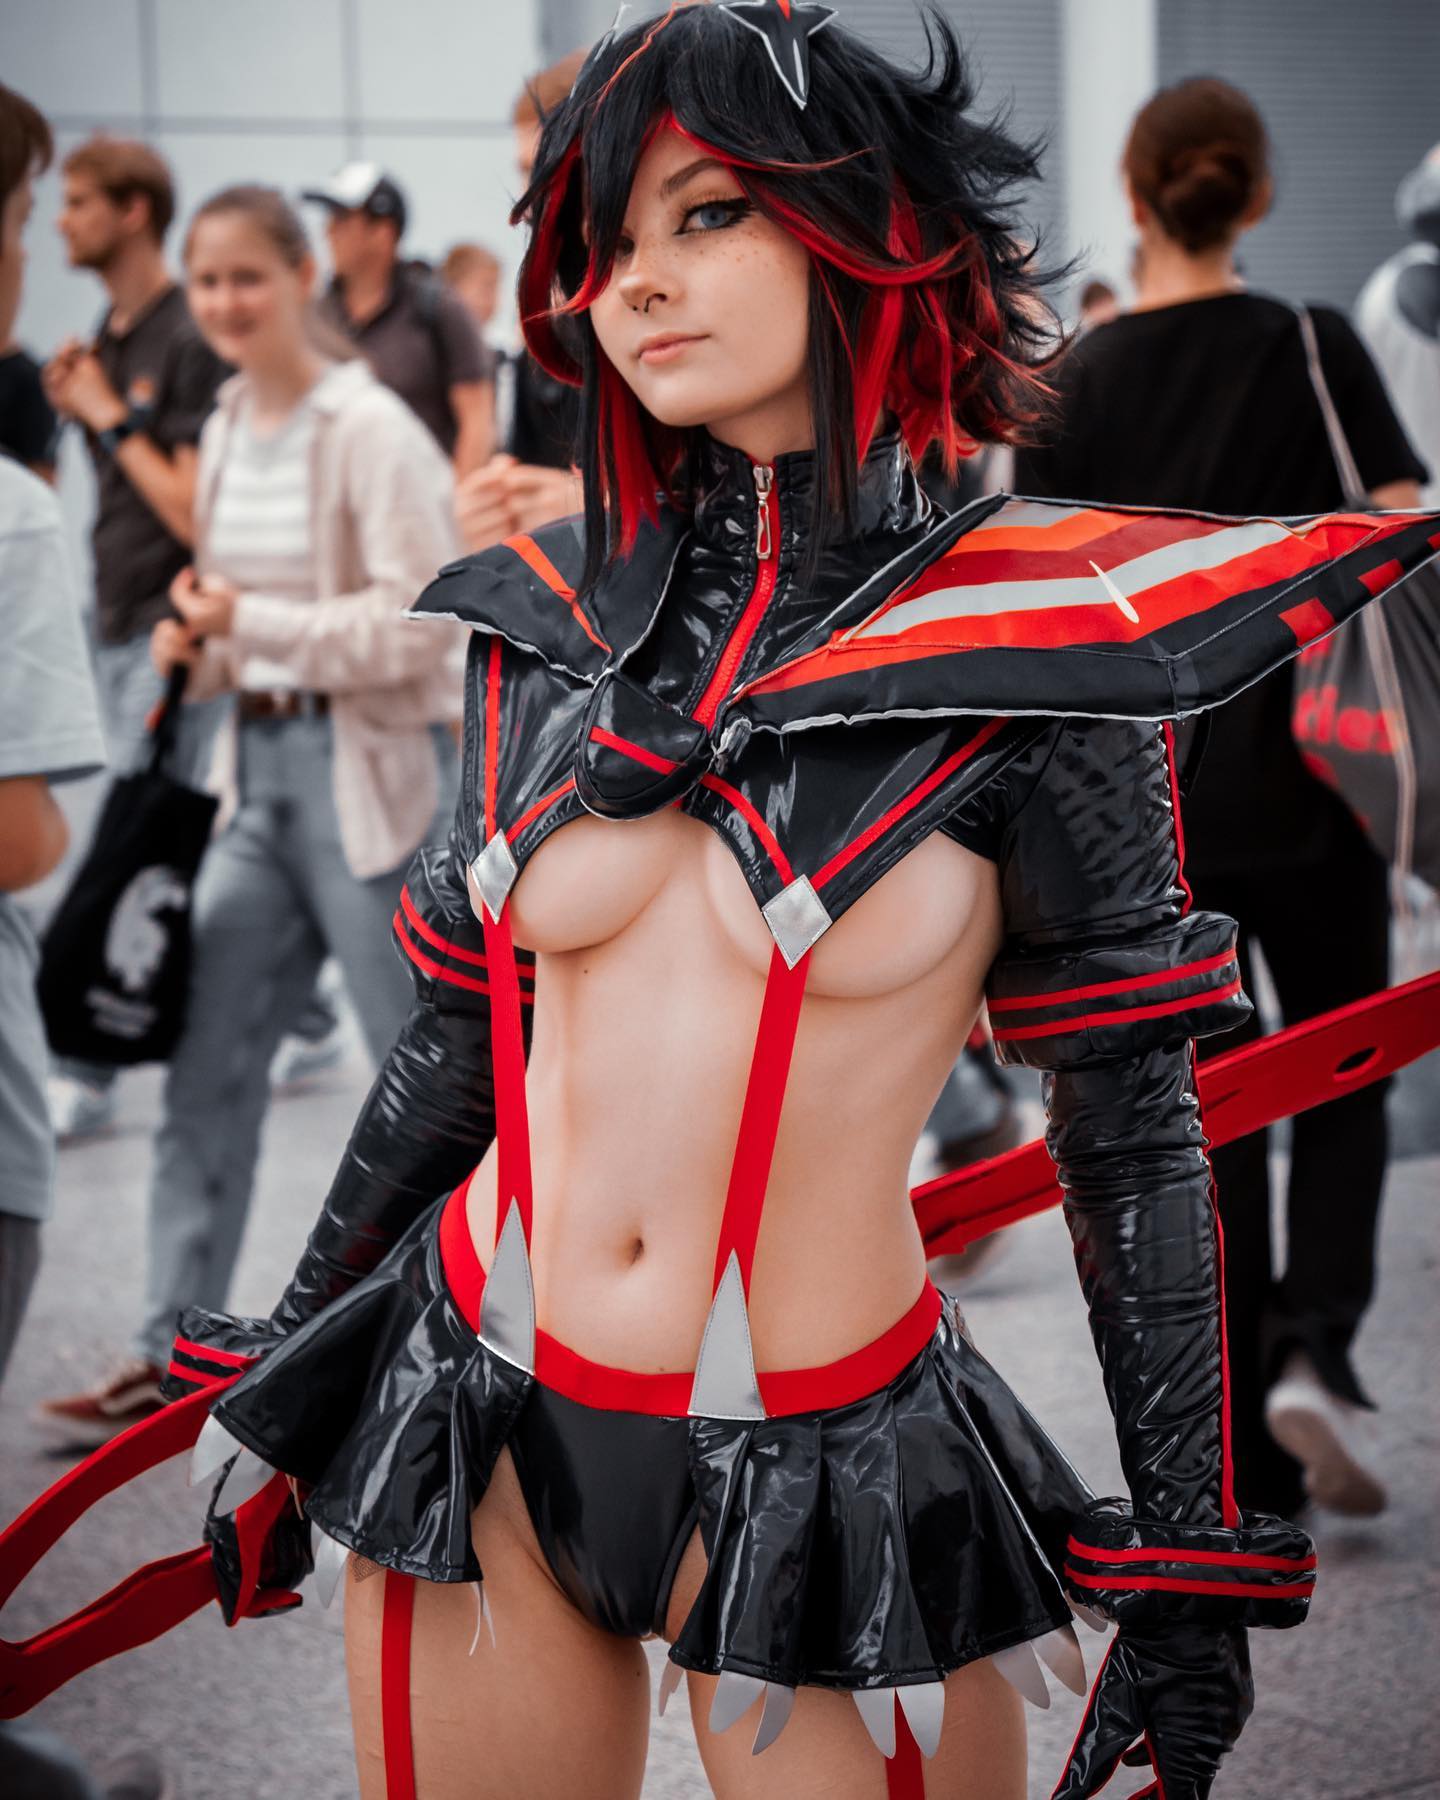 my ryuko cos at gamescom <3 
-
 huge thank you to @pic_souls_de for taking this picture 🫶‼️
-
gamescom recap:
for me personally, it was one of the best cons i ever went to. the big variety in activities and all the wonderful people i met was so awesome ! i got the chance to talk to so many of you guys which makes me so so happy, i always love meeting you 💖 im really glad that i went this year :) gonna post a little gamescom dump soon ! ❤️
-
tags!
-
#gamescom #gamescom2023 #ryukomatoi #ryukomatoicosplay #ryukocosplay #killlakill #killlakillcosplay #matoiryuko #anime #animecosplay #cosplay #cosplayer #cosplaying #cosplaygirl